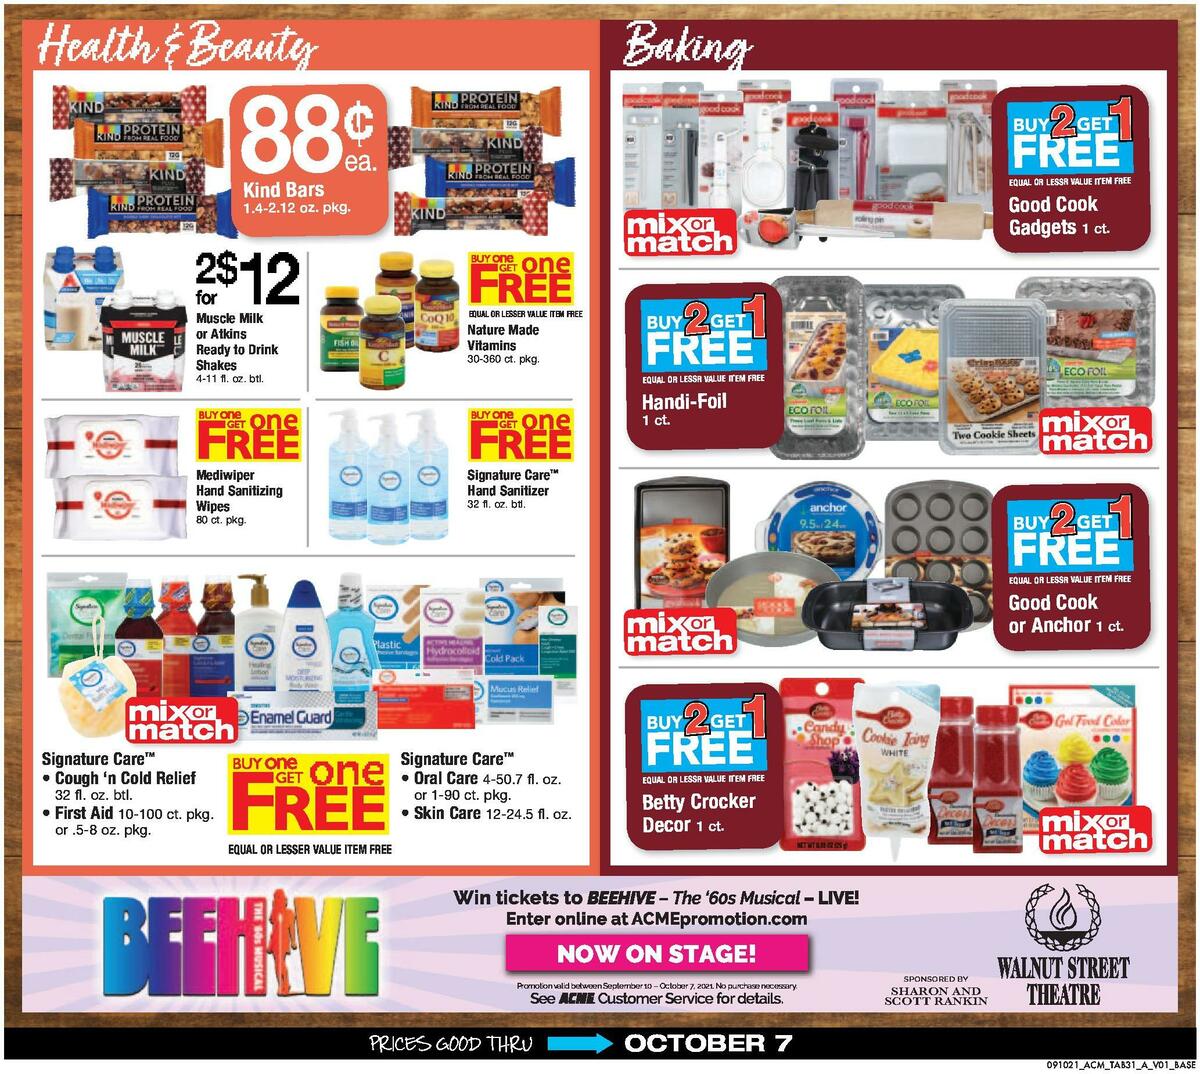 ACME Markets Big Book of Savings Weekly Ad from September 10